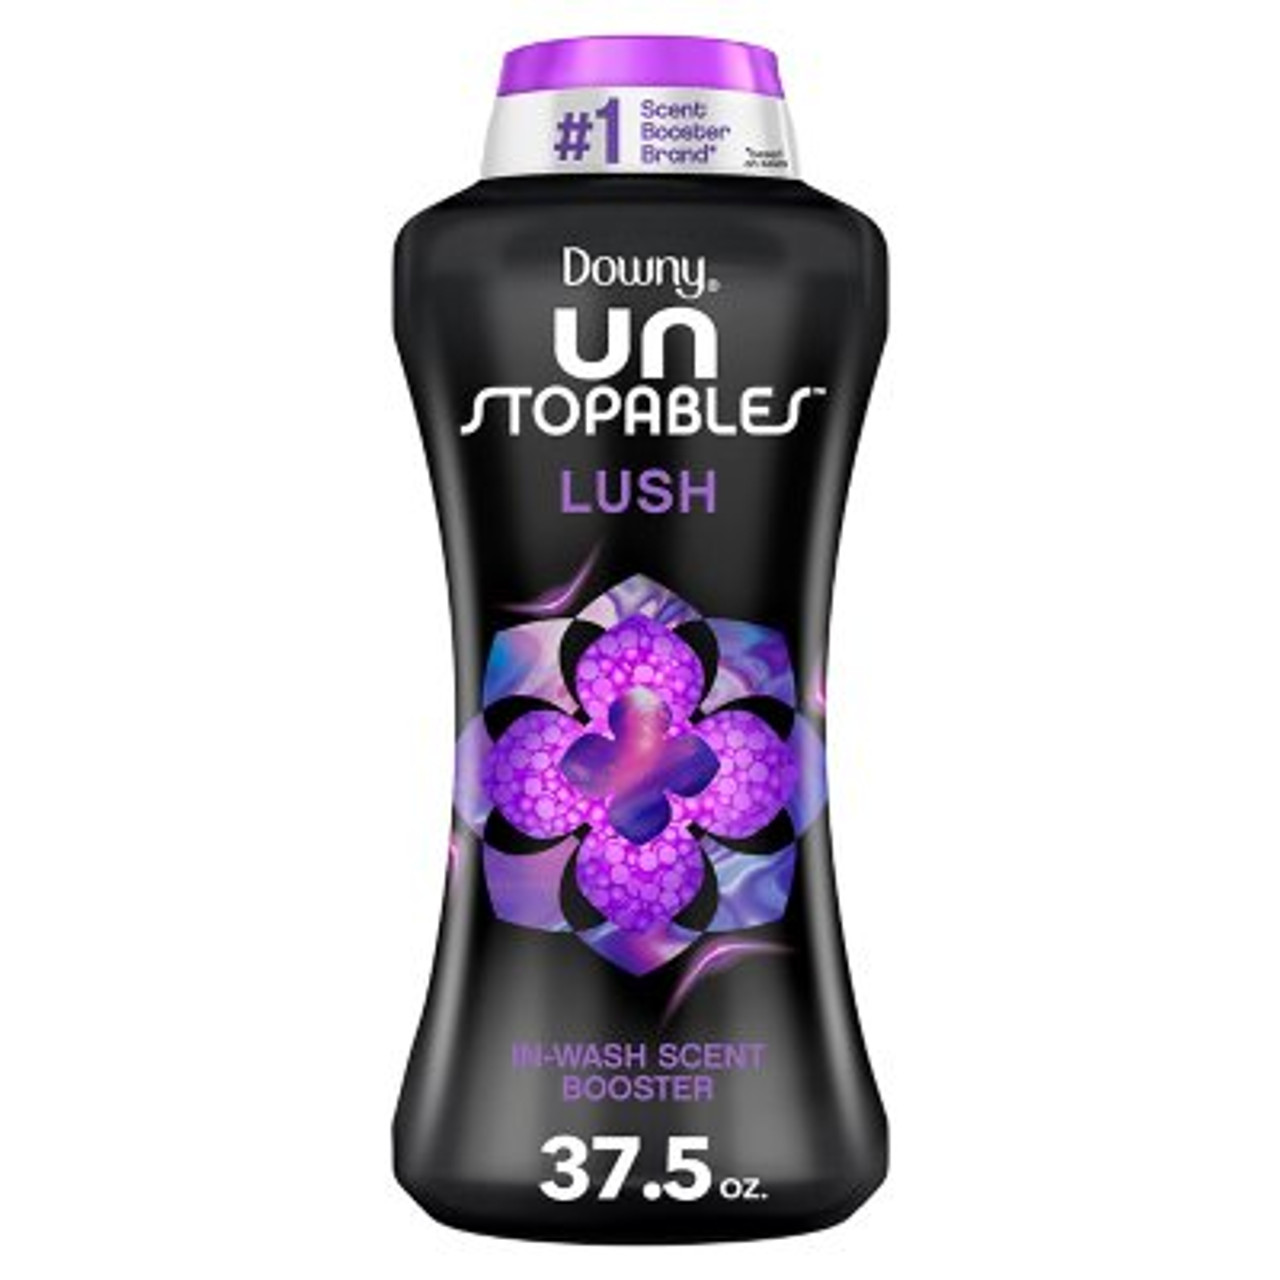 Downy Unstopables In-Wash Scent Booster Beads, Lush (37.5 oz.) - [From 70.00 - Choose pk Qty ] - *Ships from Miami